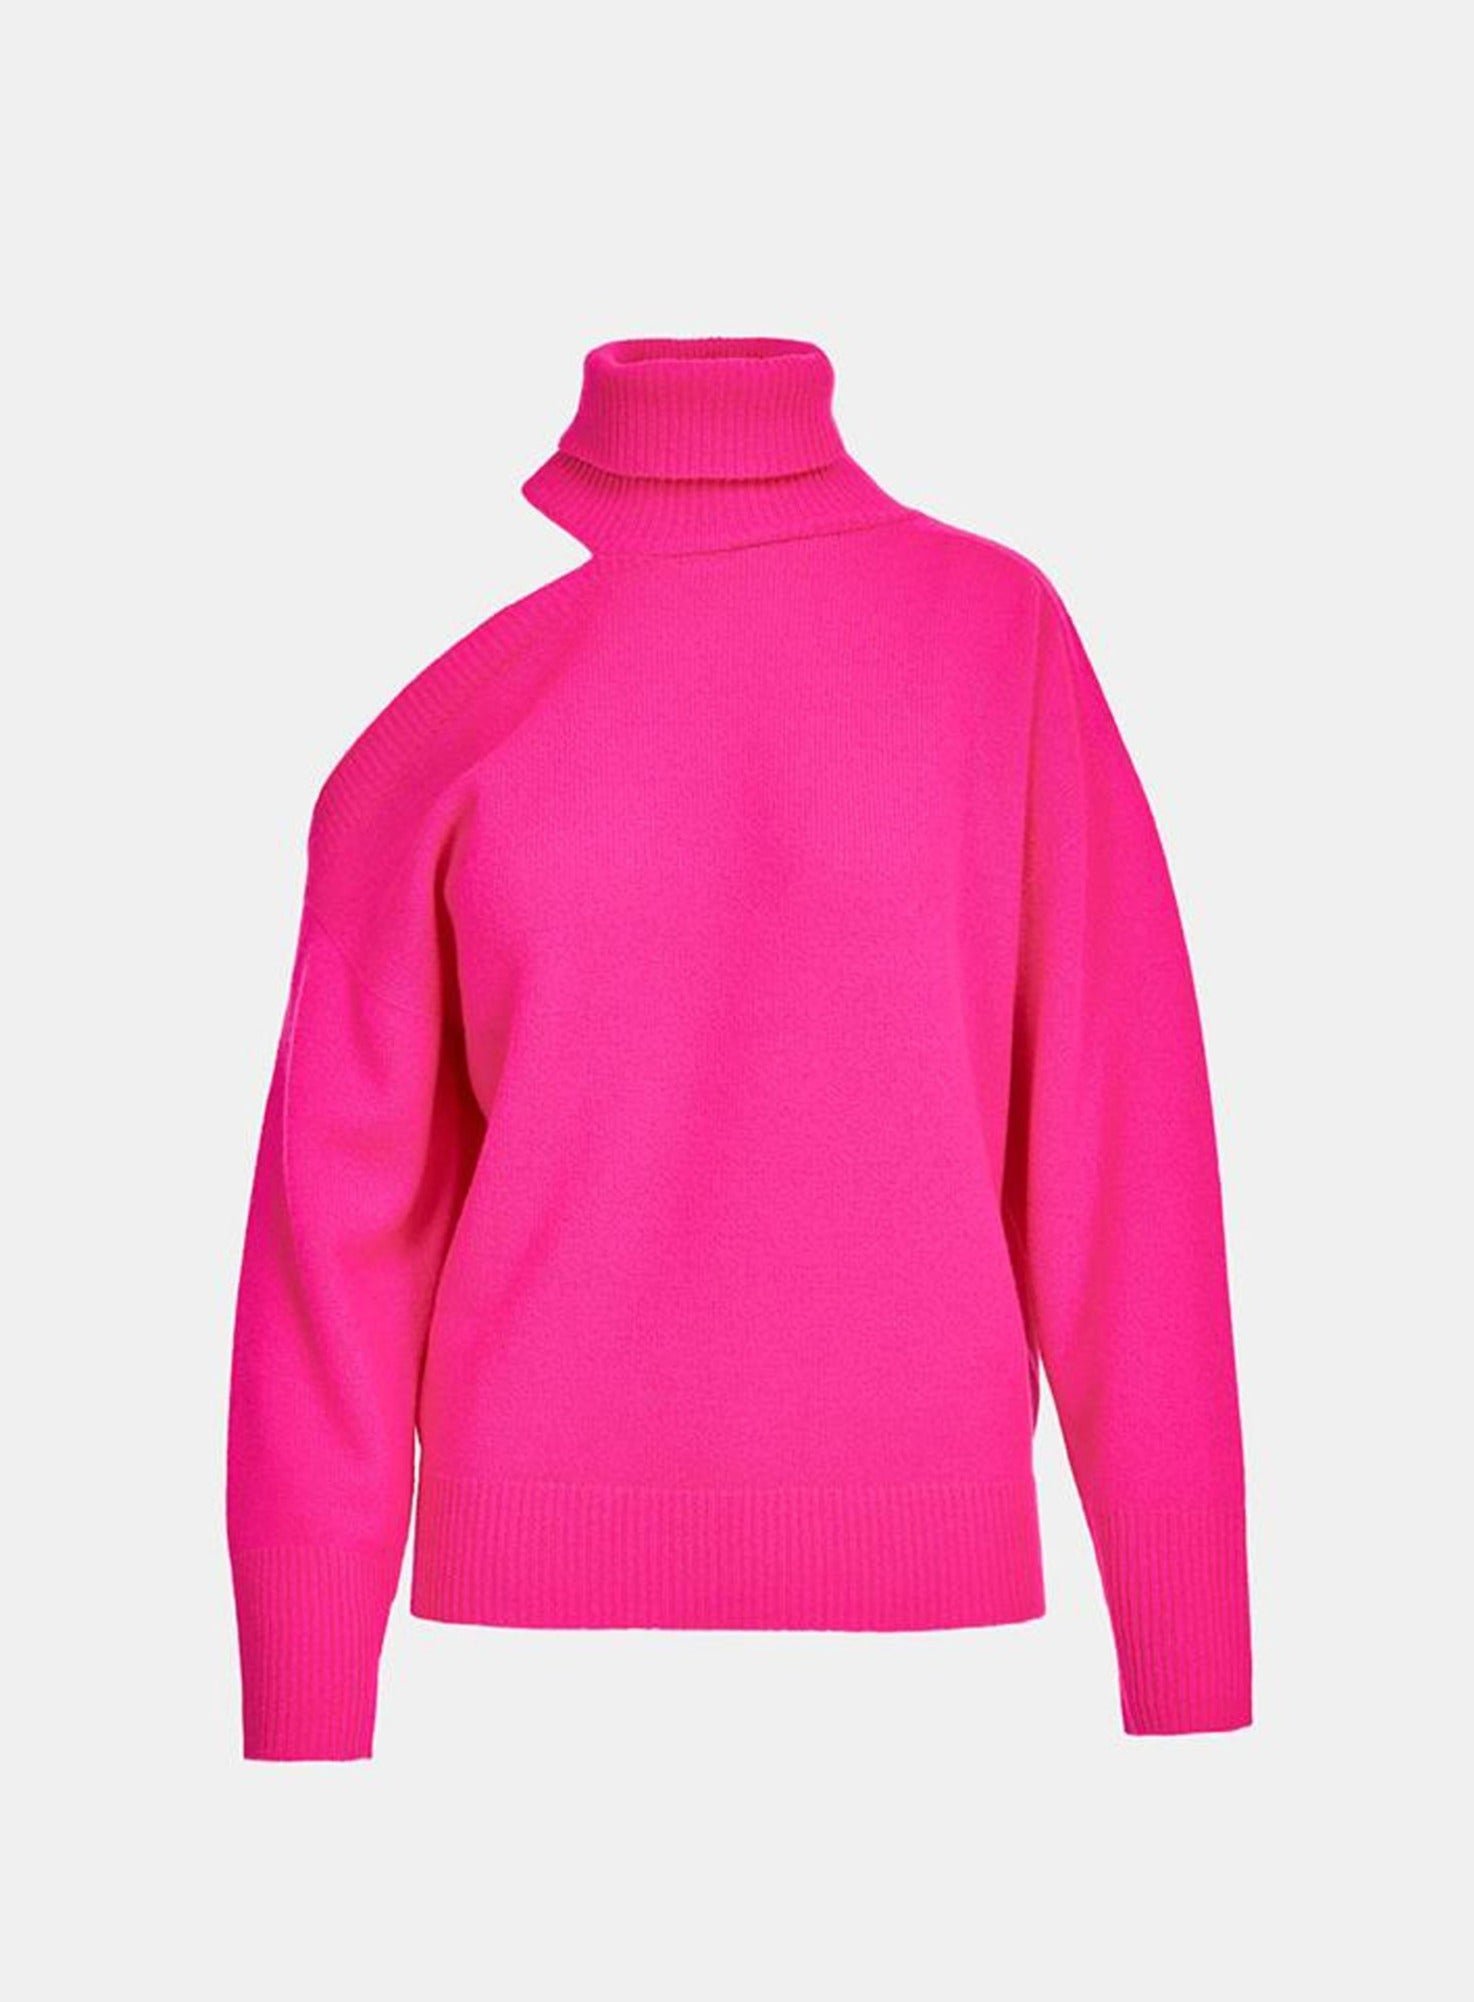 Bright pink jumper with shoulder cutout.